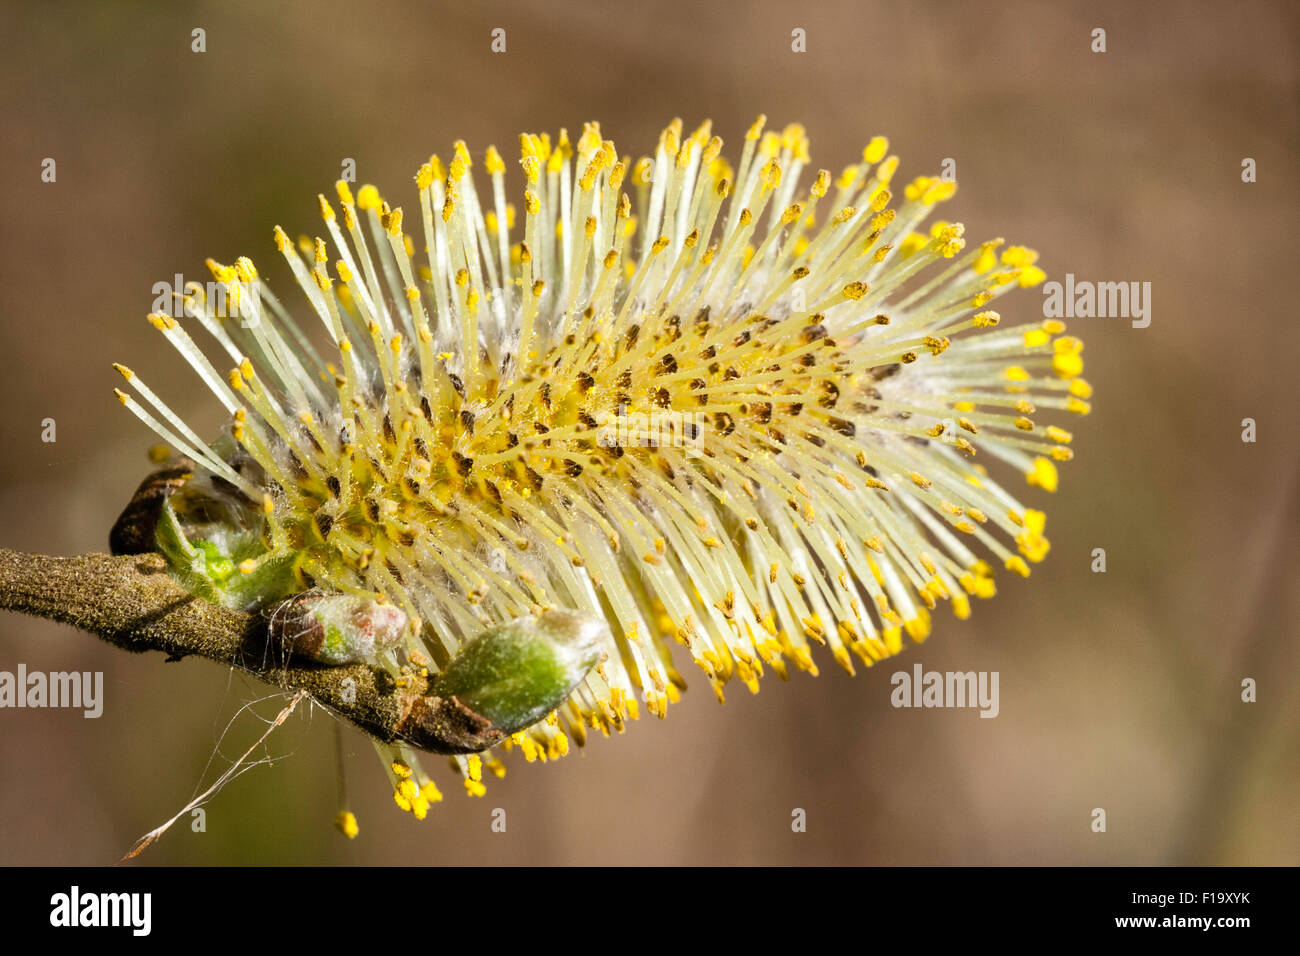 Tree shrub, close up, macro shot of a flowering yellow and white Catkin or ament, a unisex cylindrical flower cluster, (spike)  of the raceme type. Stock Photo